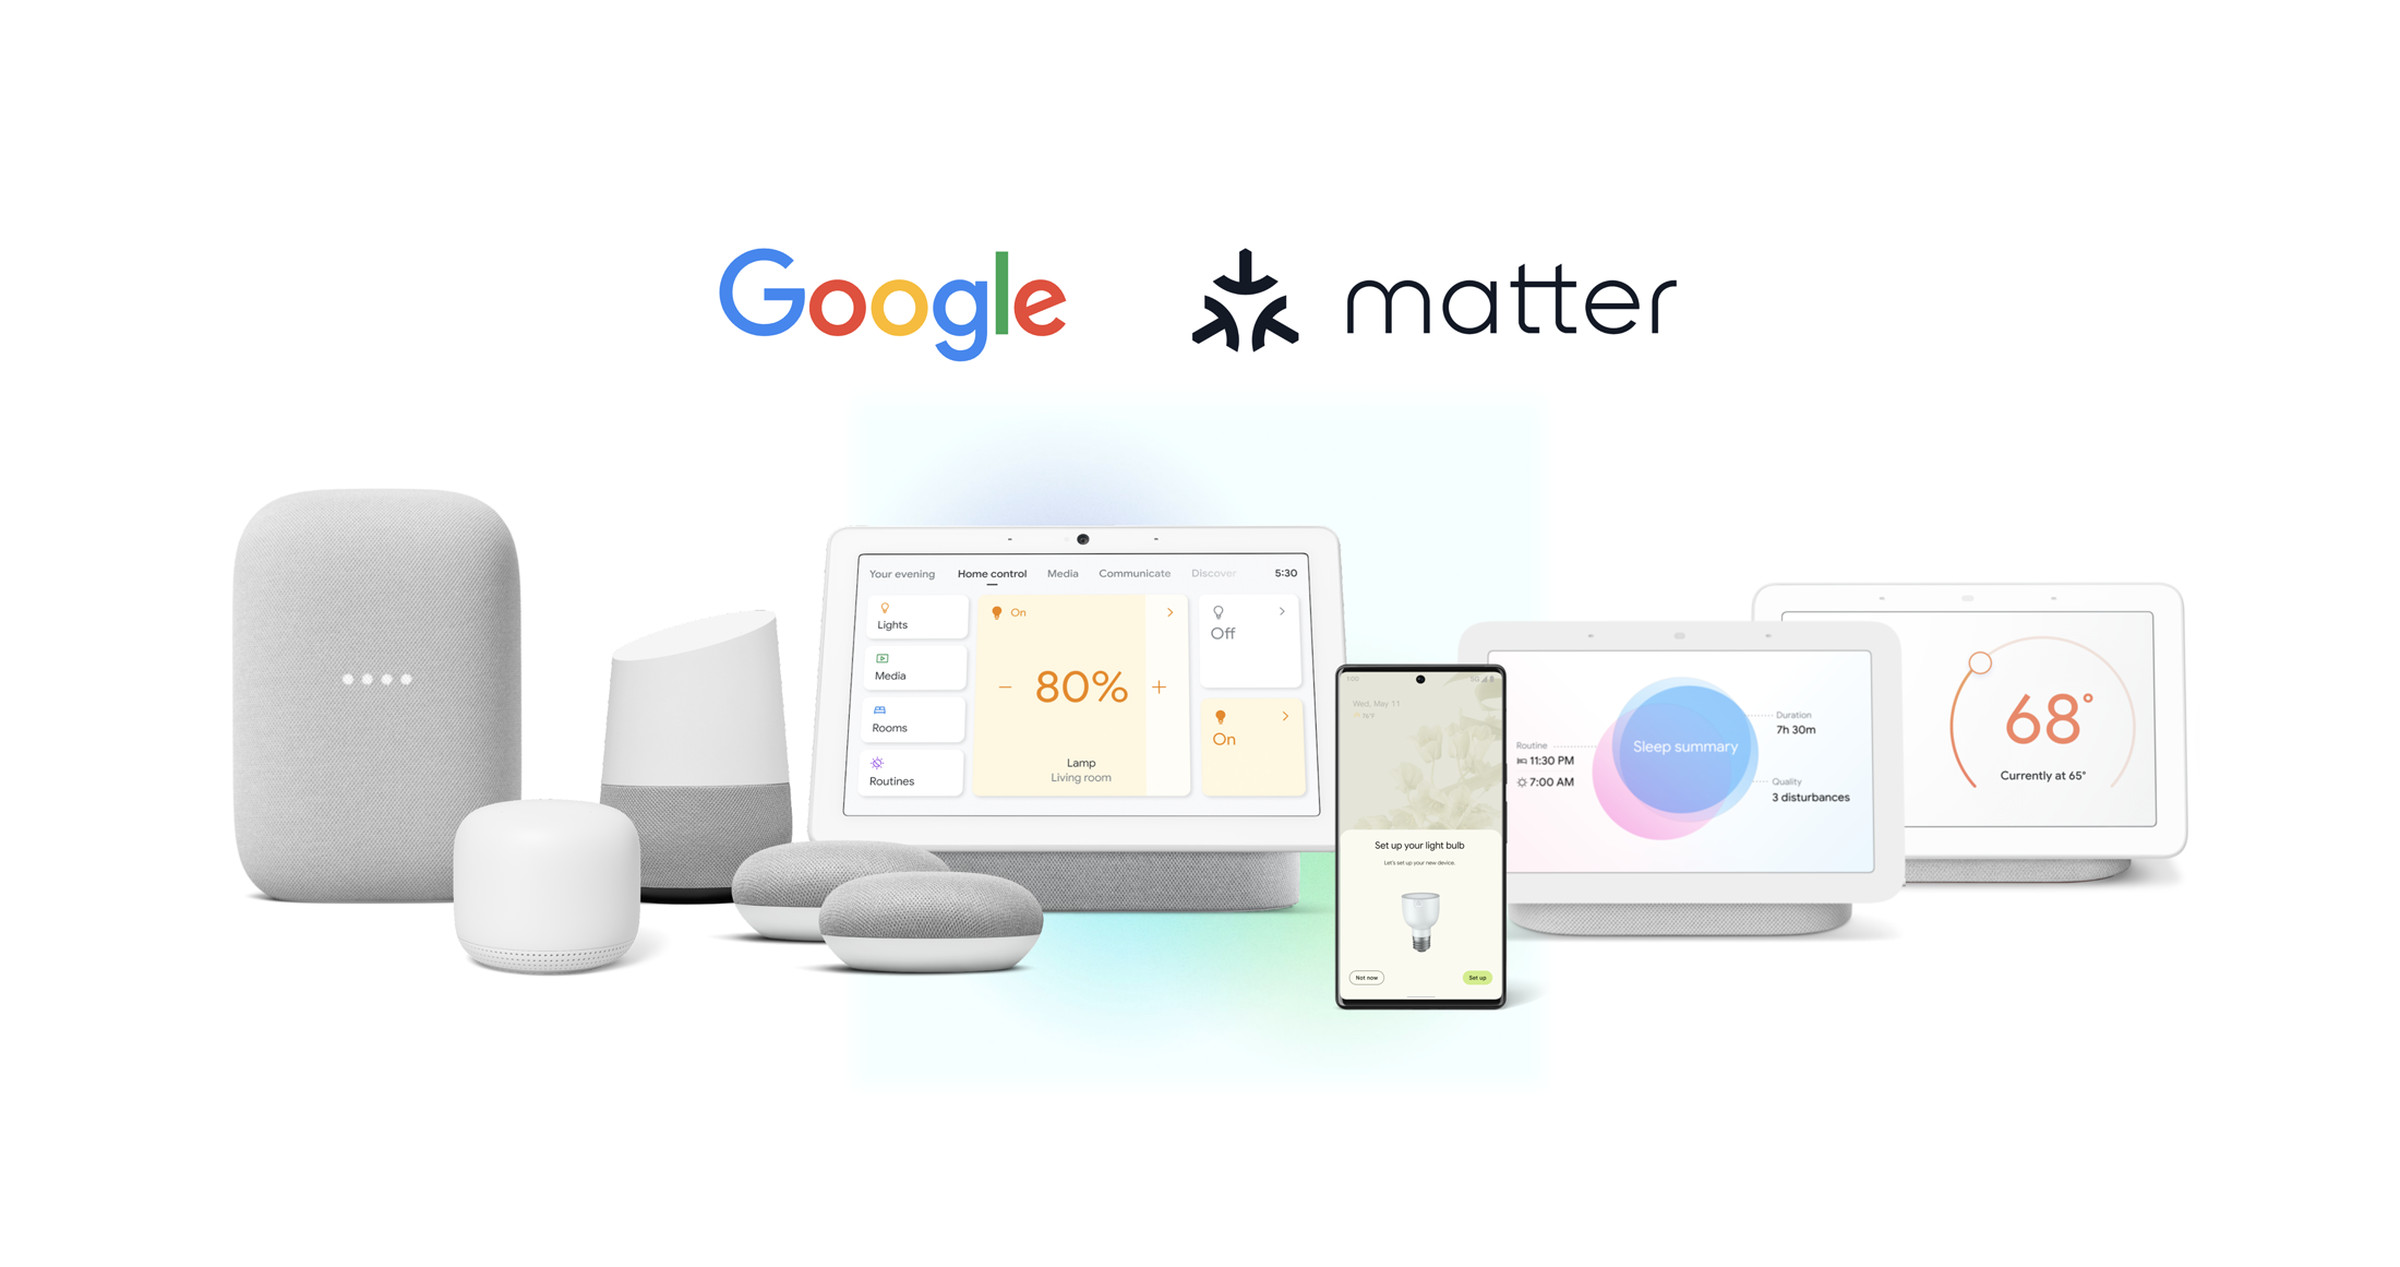 Google has announced its Nest speakers and smart displays will be Matter controllers.